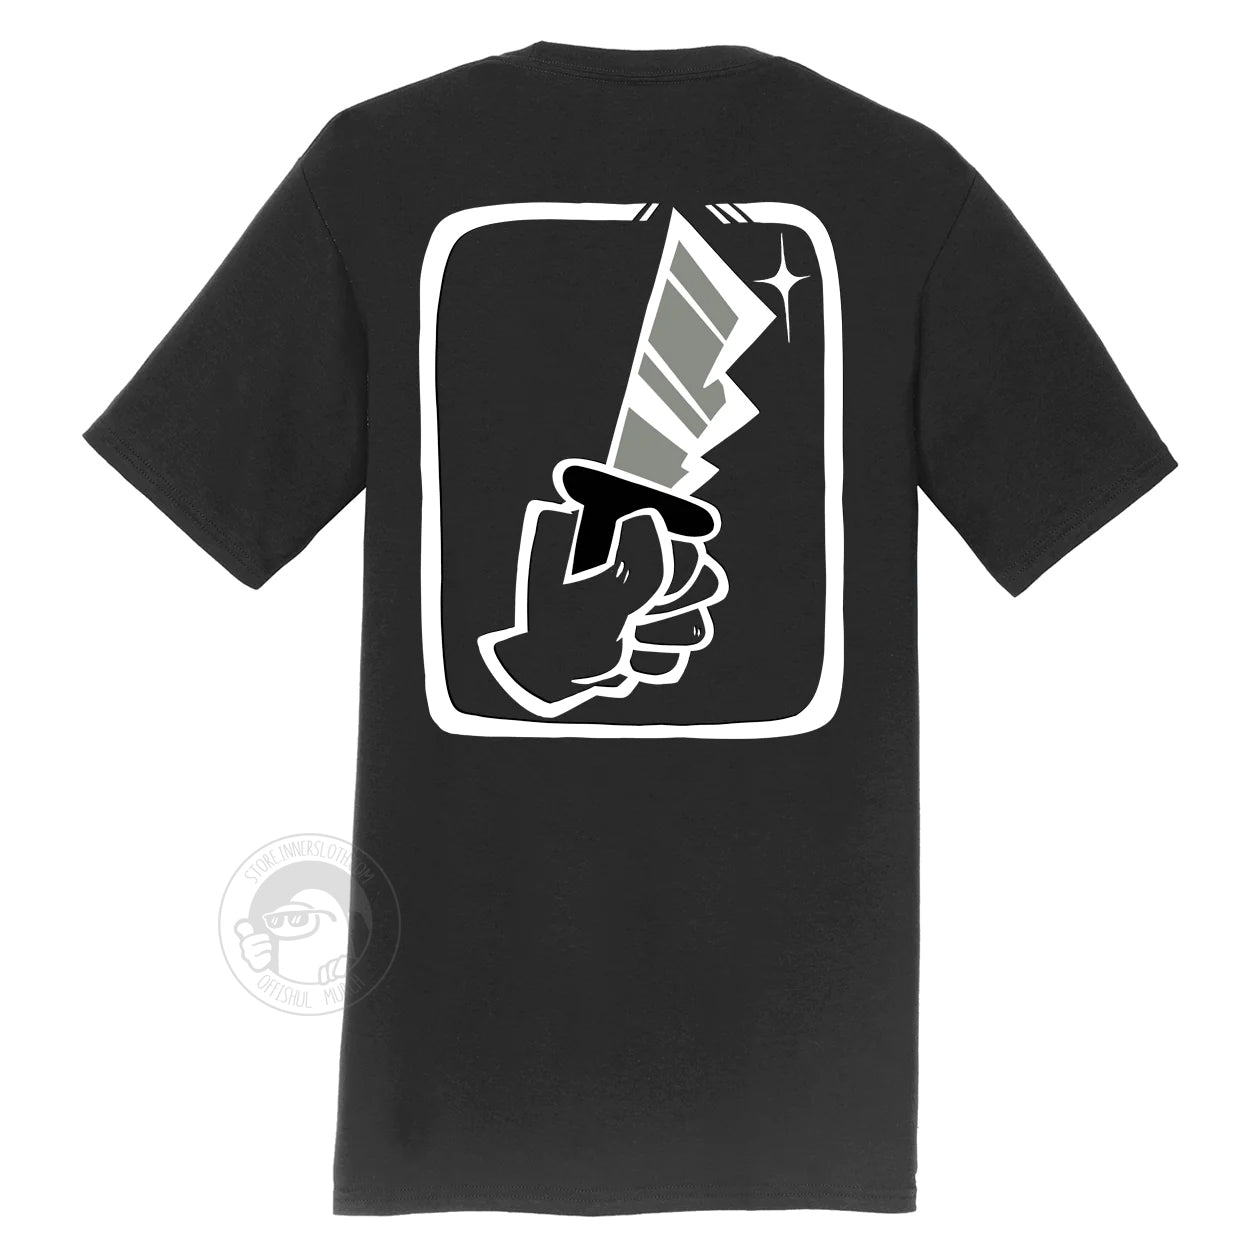 A product photograph of the Among Us: Shhhirt t-shirt in black. The art on the shirt shows the crewmate visor and a hand with one finger pointing up in a “shh”ing pose. 